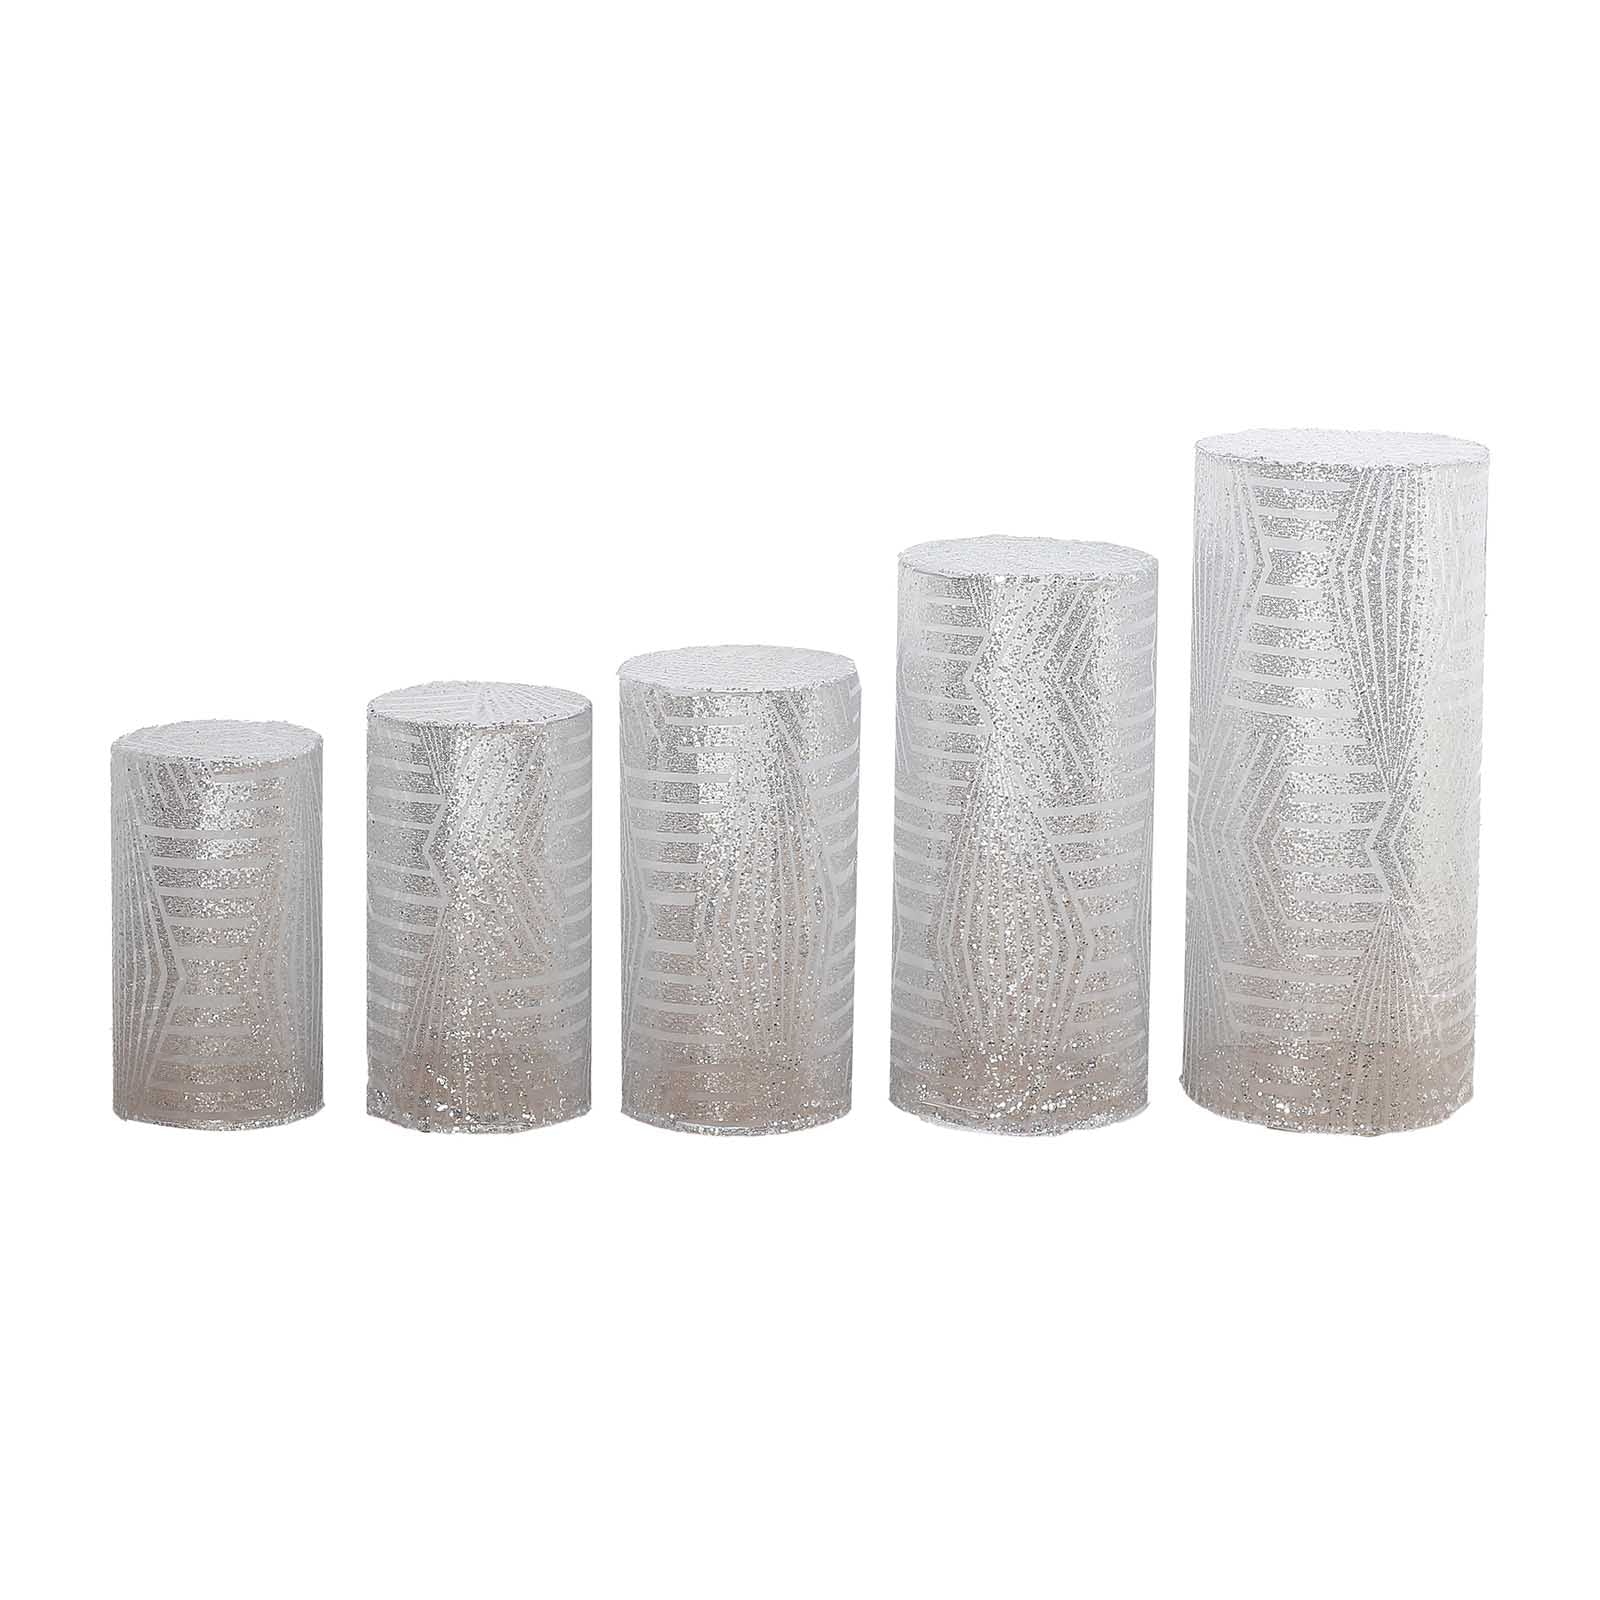 5 Sequin Mesh Cylinder Display Box Stand Covers with Geometric Pattern Embroidery PROP_BOX_006_02G_SILV